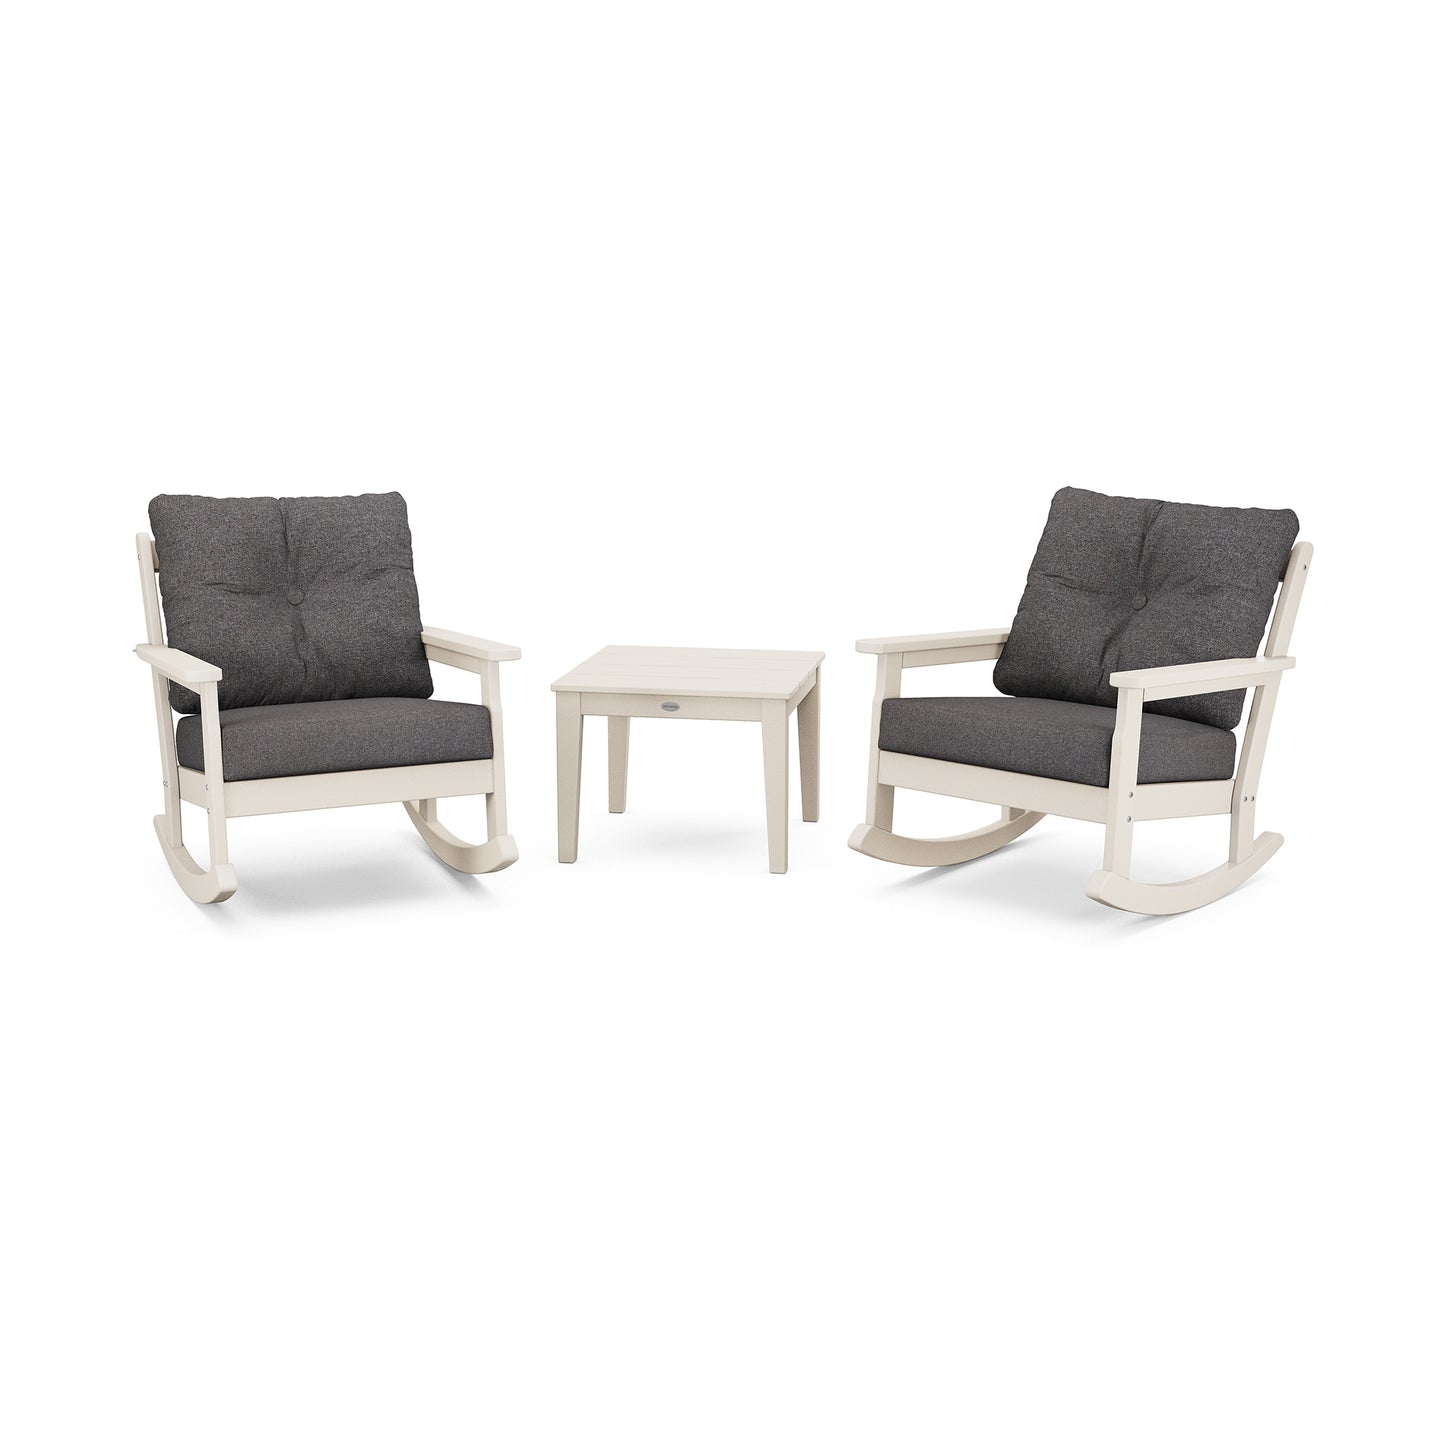 Two white rocking chairs with gray cushions from the POLYWOOD Vineyard 3-Piece Deep Seating Rocker Set, set on either side of a small white table, isolated on a white background.